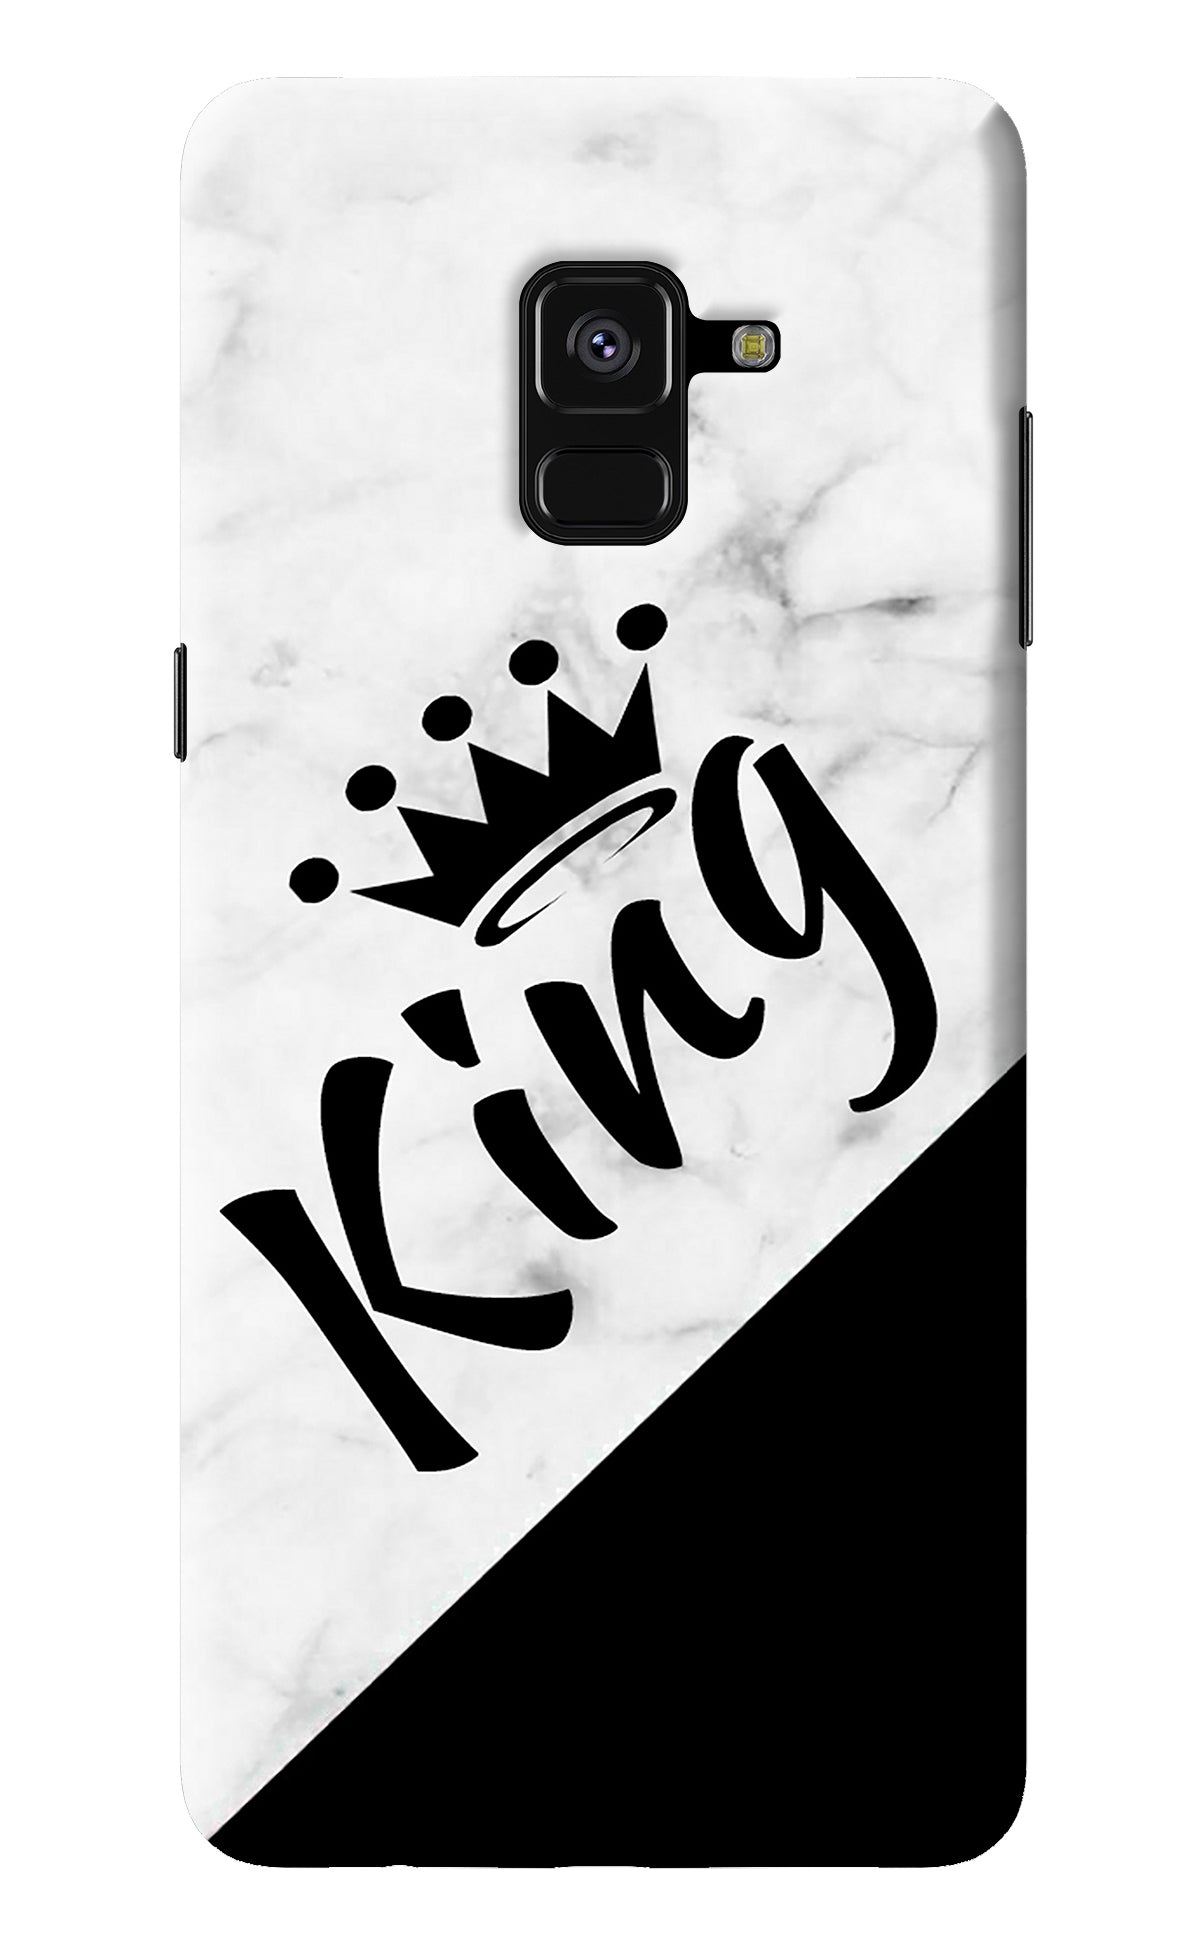 King Samsung A8 plus Back Cover